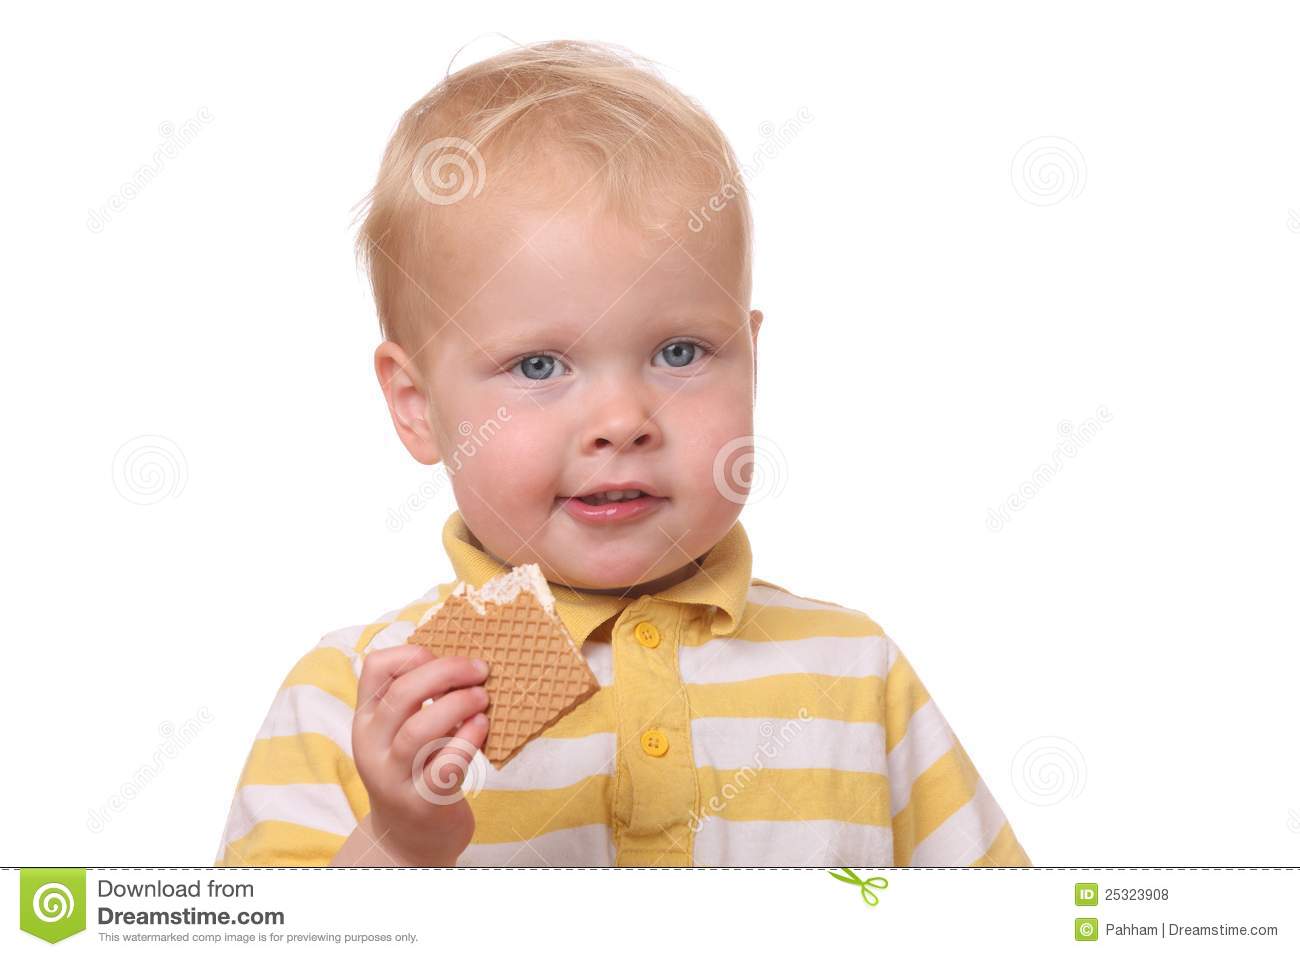 Portrait Of A Young Kid Eating Cookies On White Background